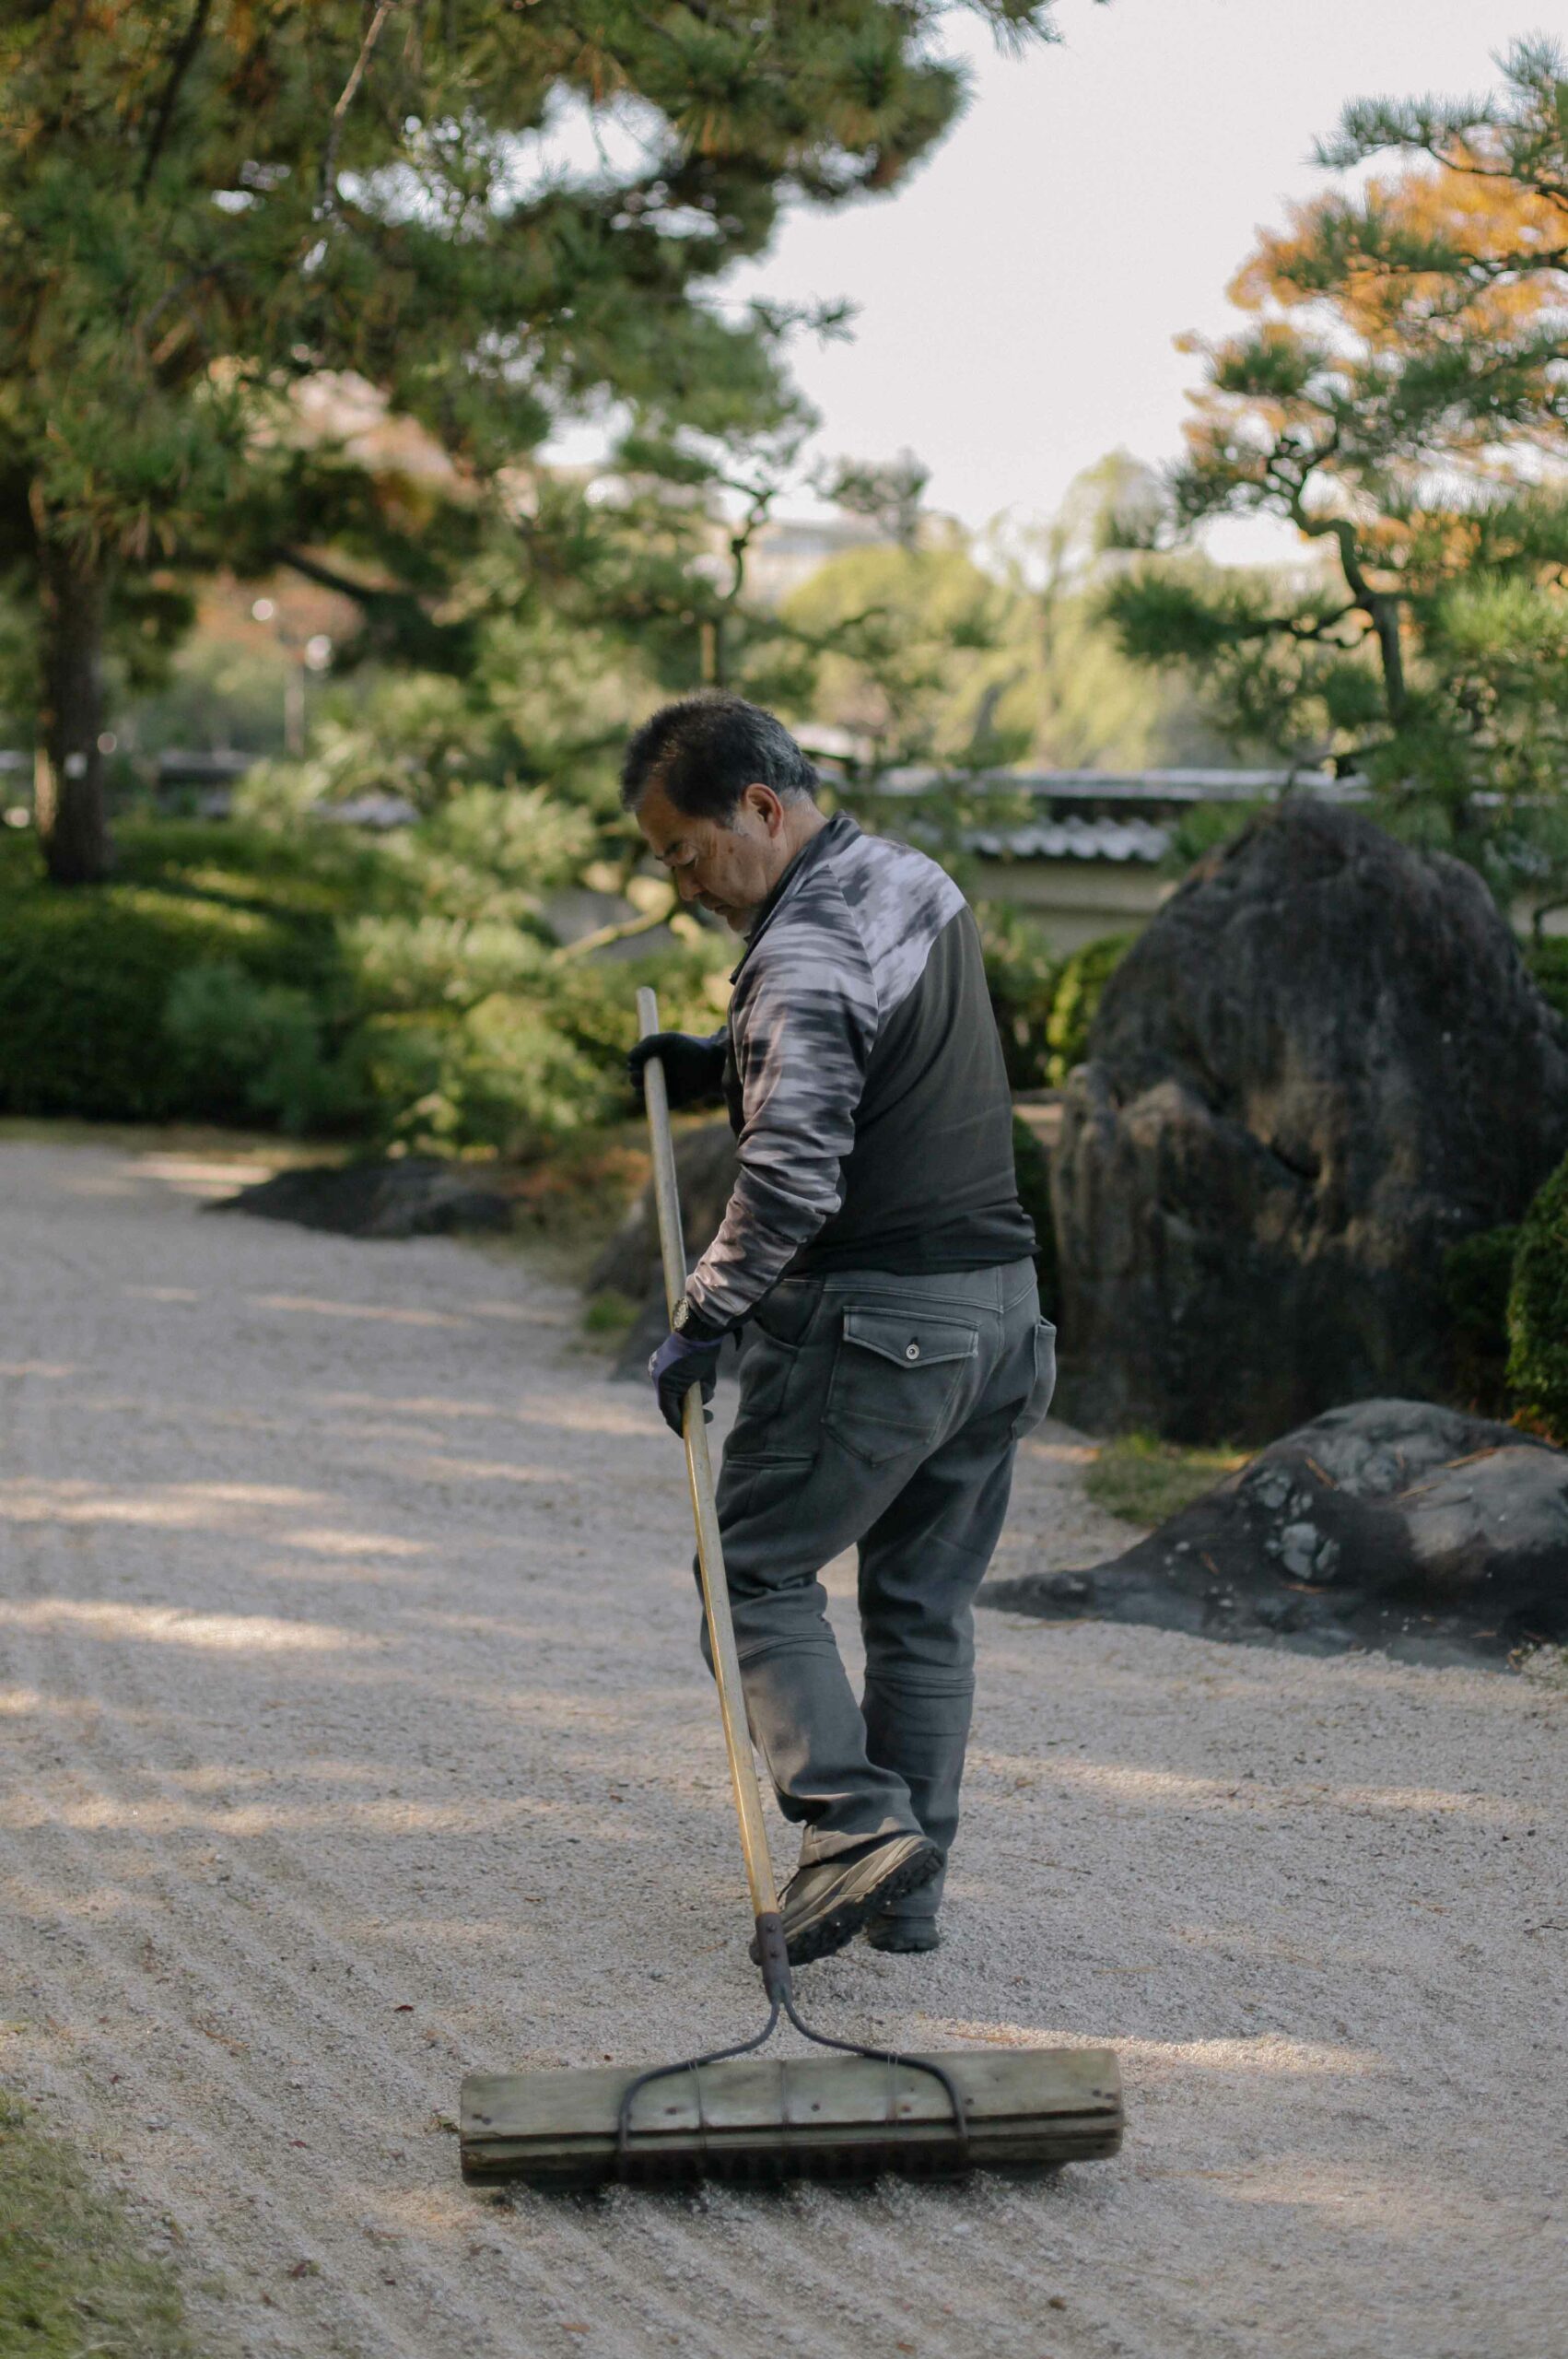 The practice of raking gravel at Ōhori Park Japanese Garden may not be a Zen one, but it looks relaxing.